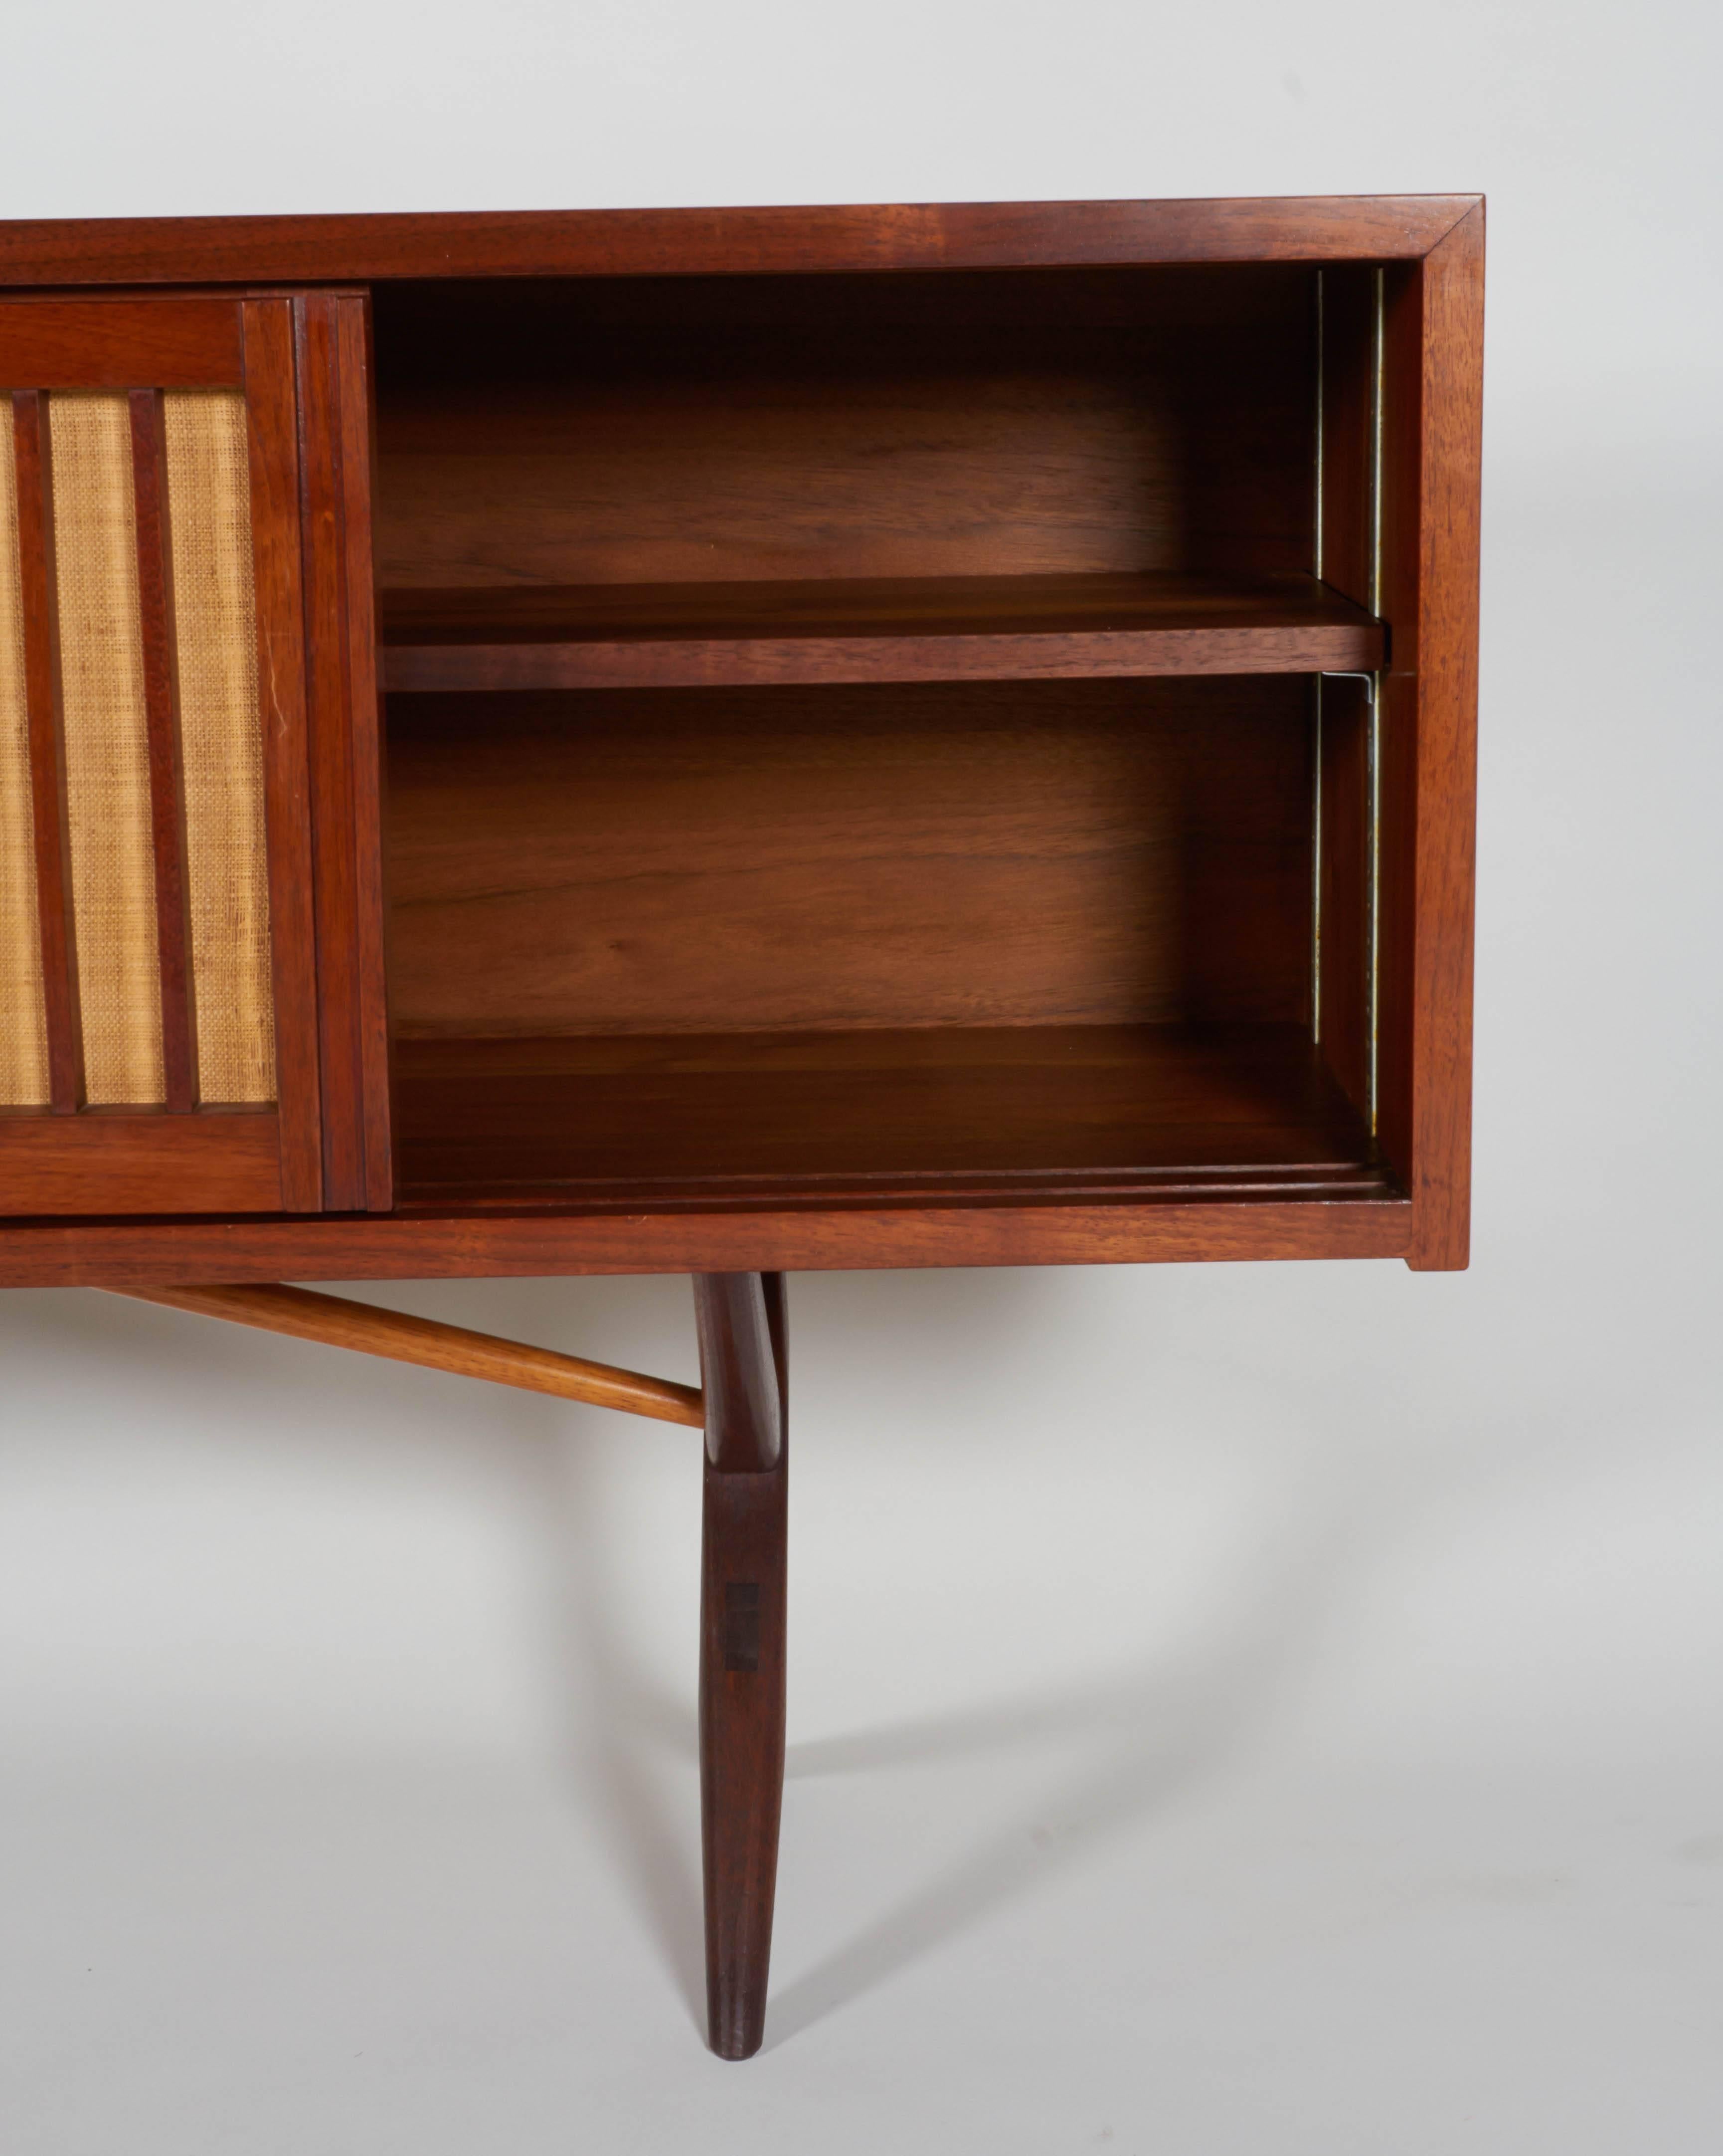 American Rare and Exceptional George Nakashima Cabinet